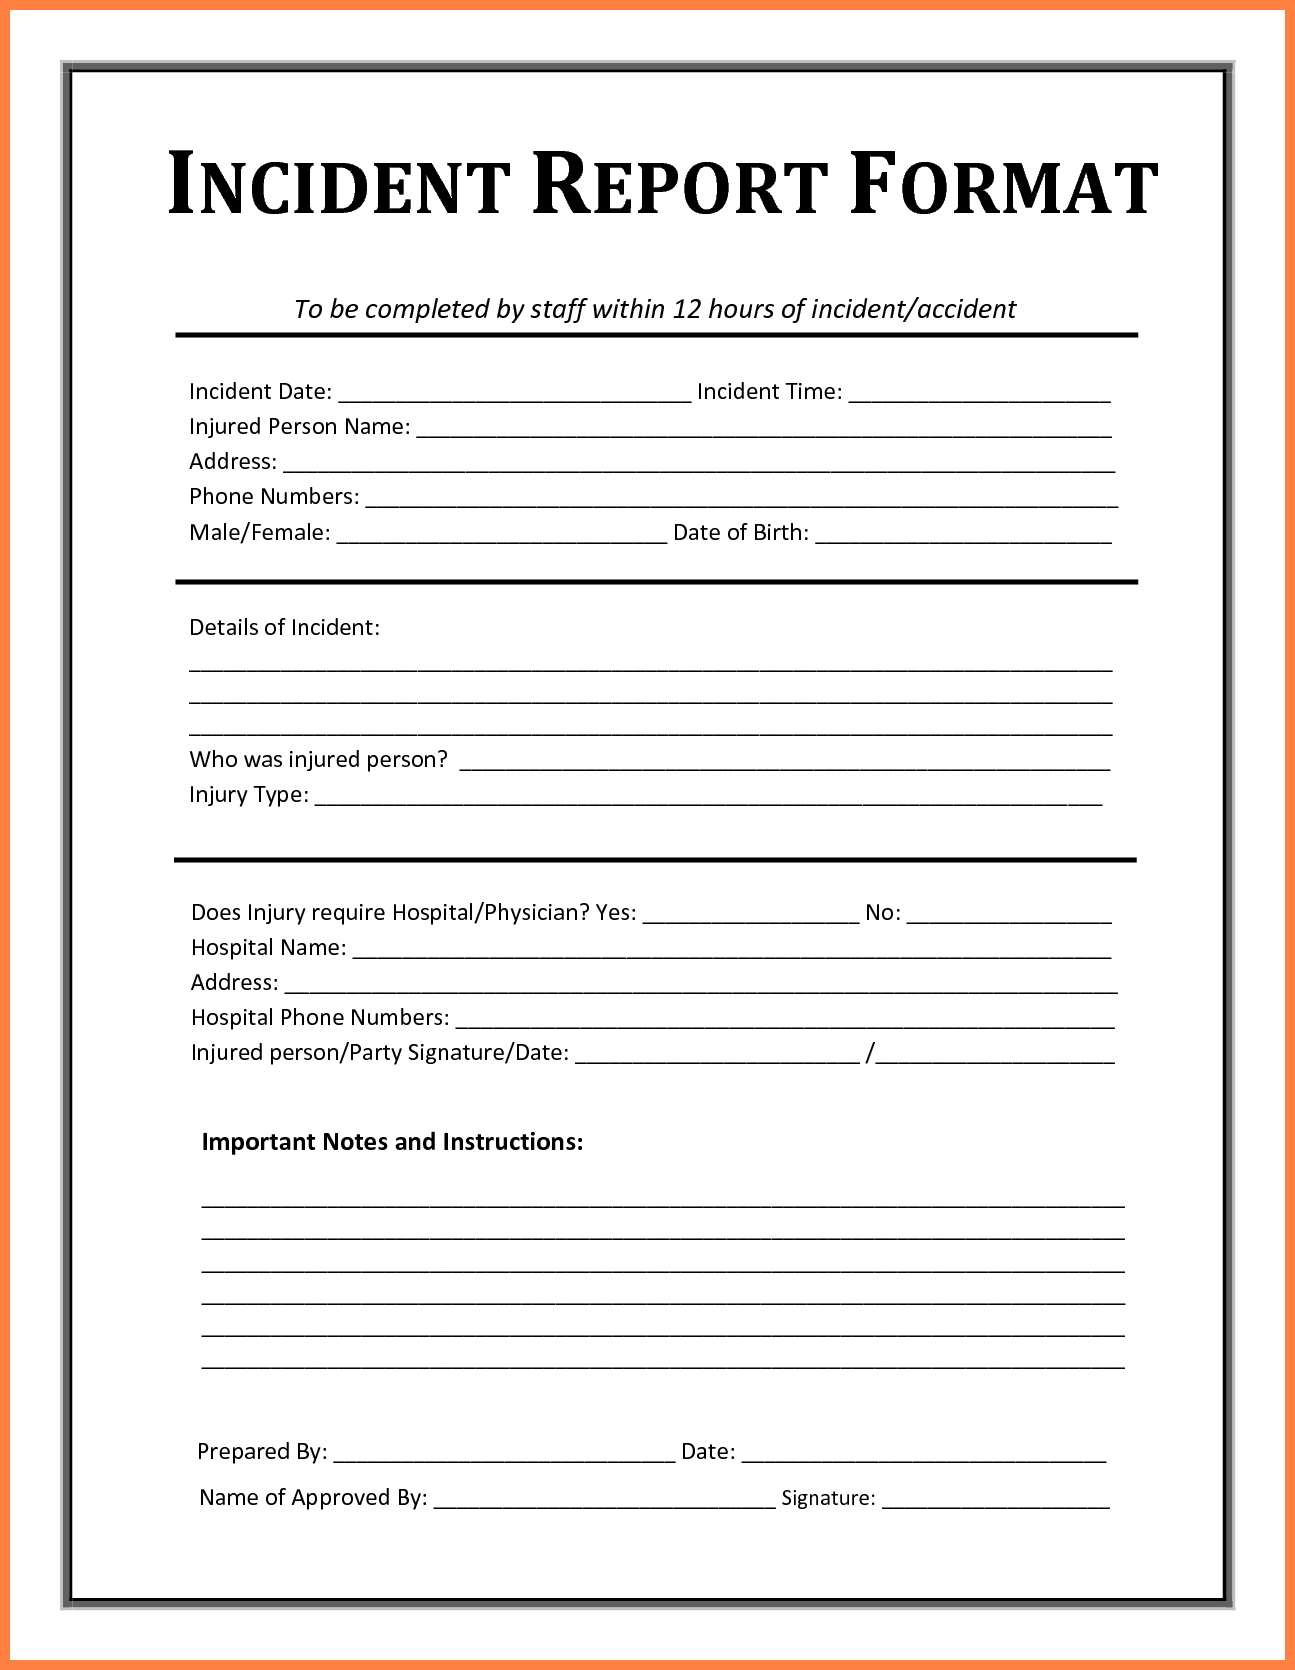 safety incident report form template   Maggi.locustdesign.co